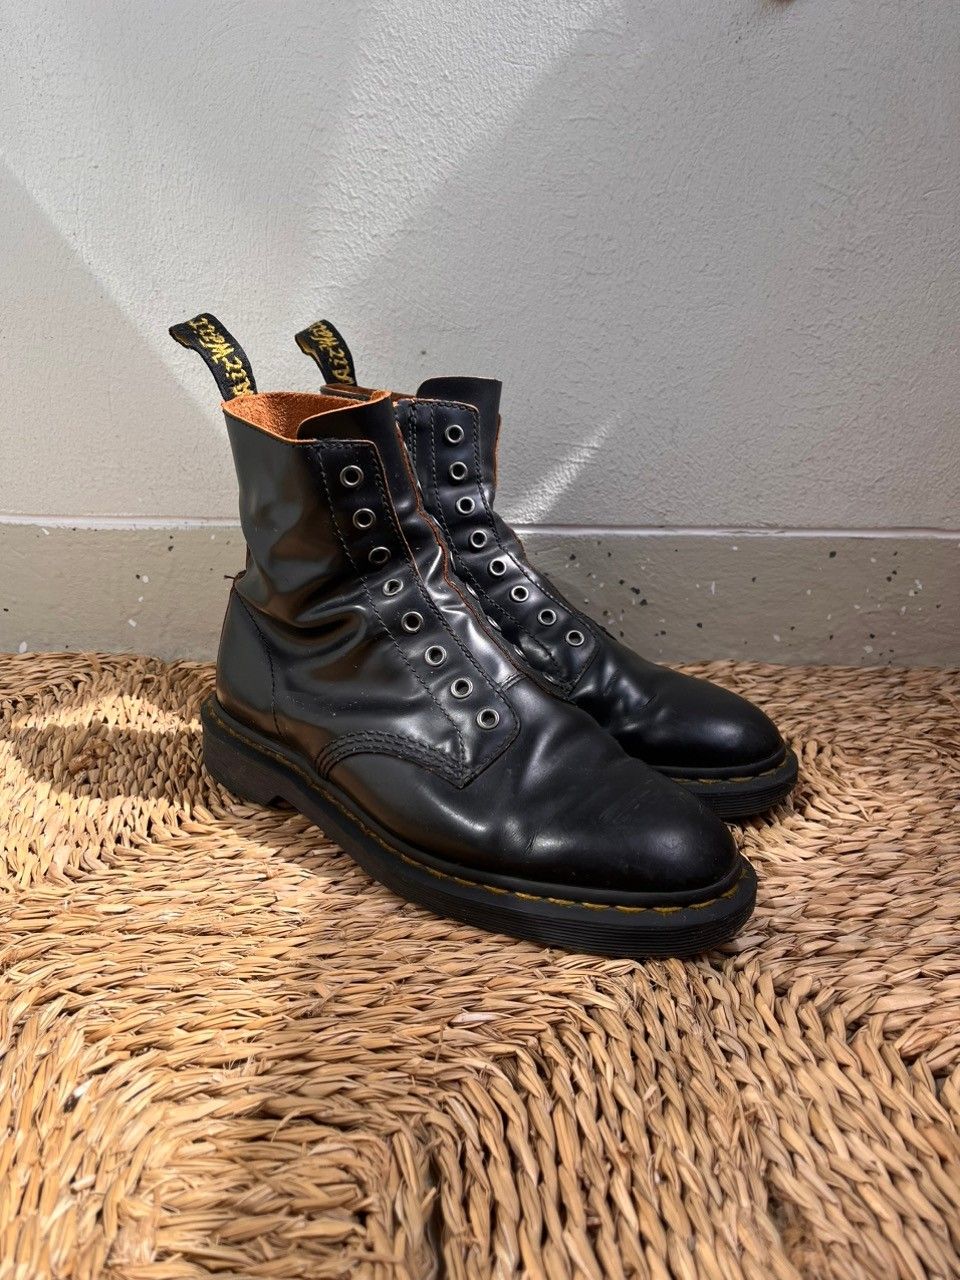 Dr. Martens special edition maiharit